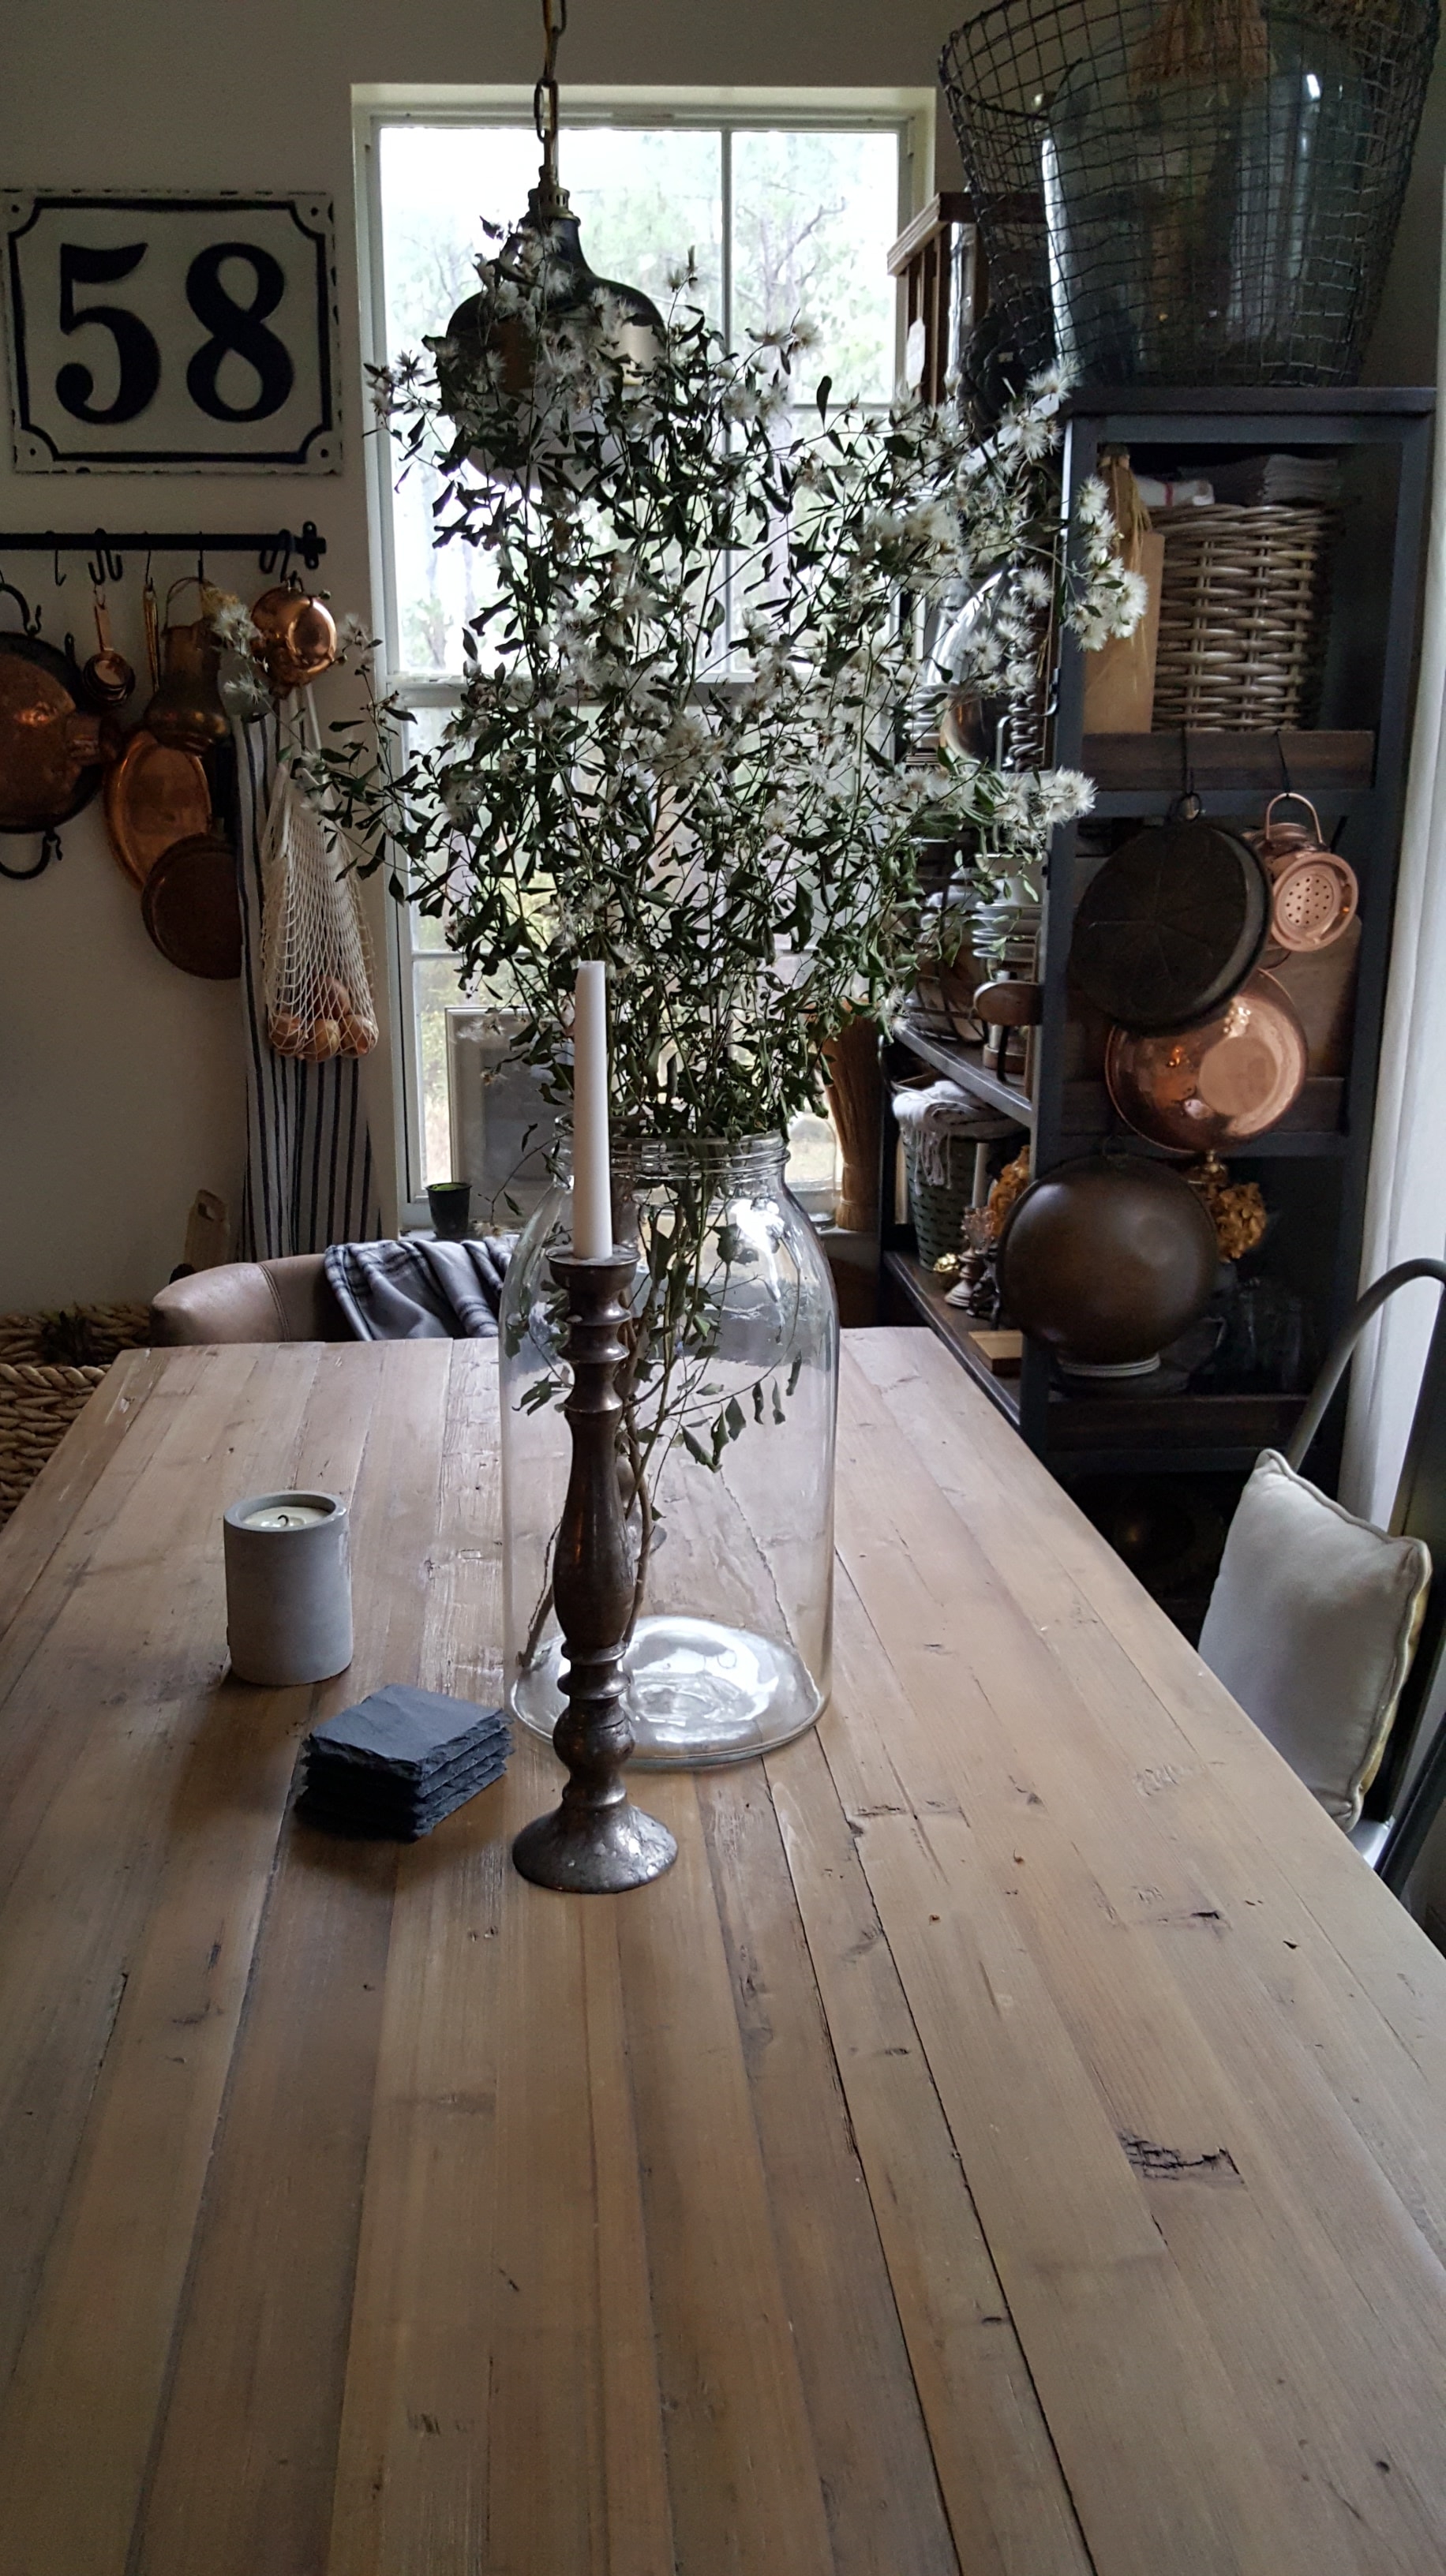 White Flowers and Dried Branches in Home Decor Farmhouse Kitchen and Dining Table